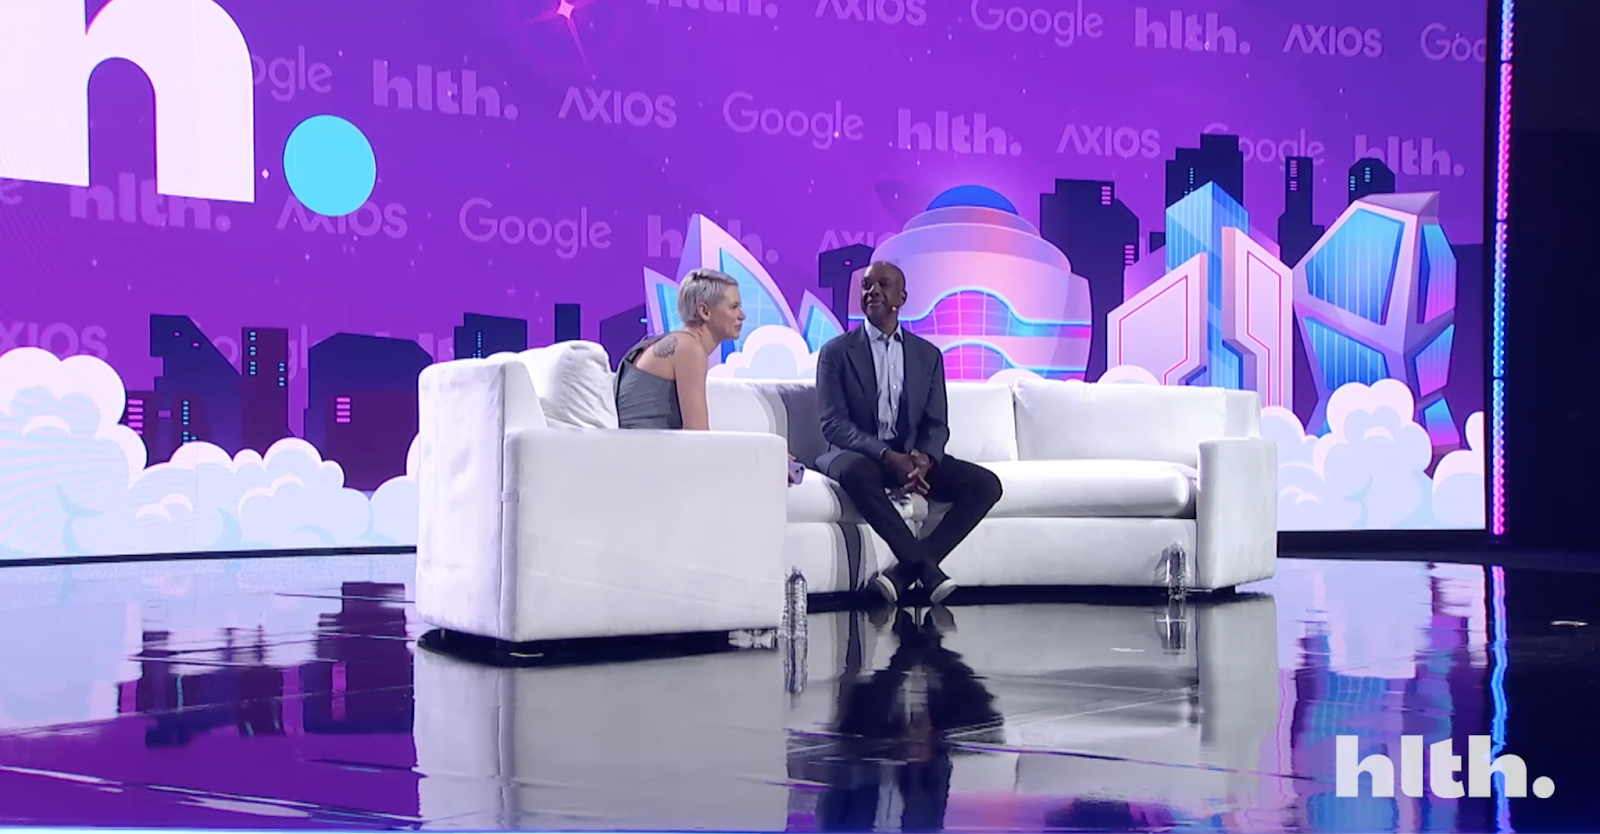 Erin Brodwin (Axios); James Manyika (Google) at hlth stage